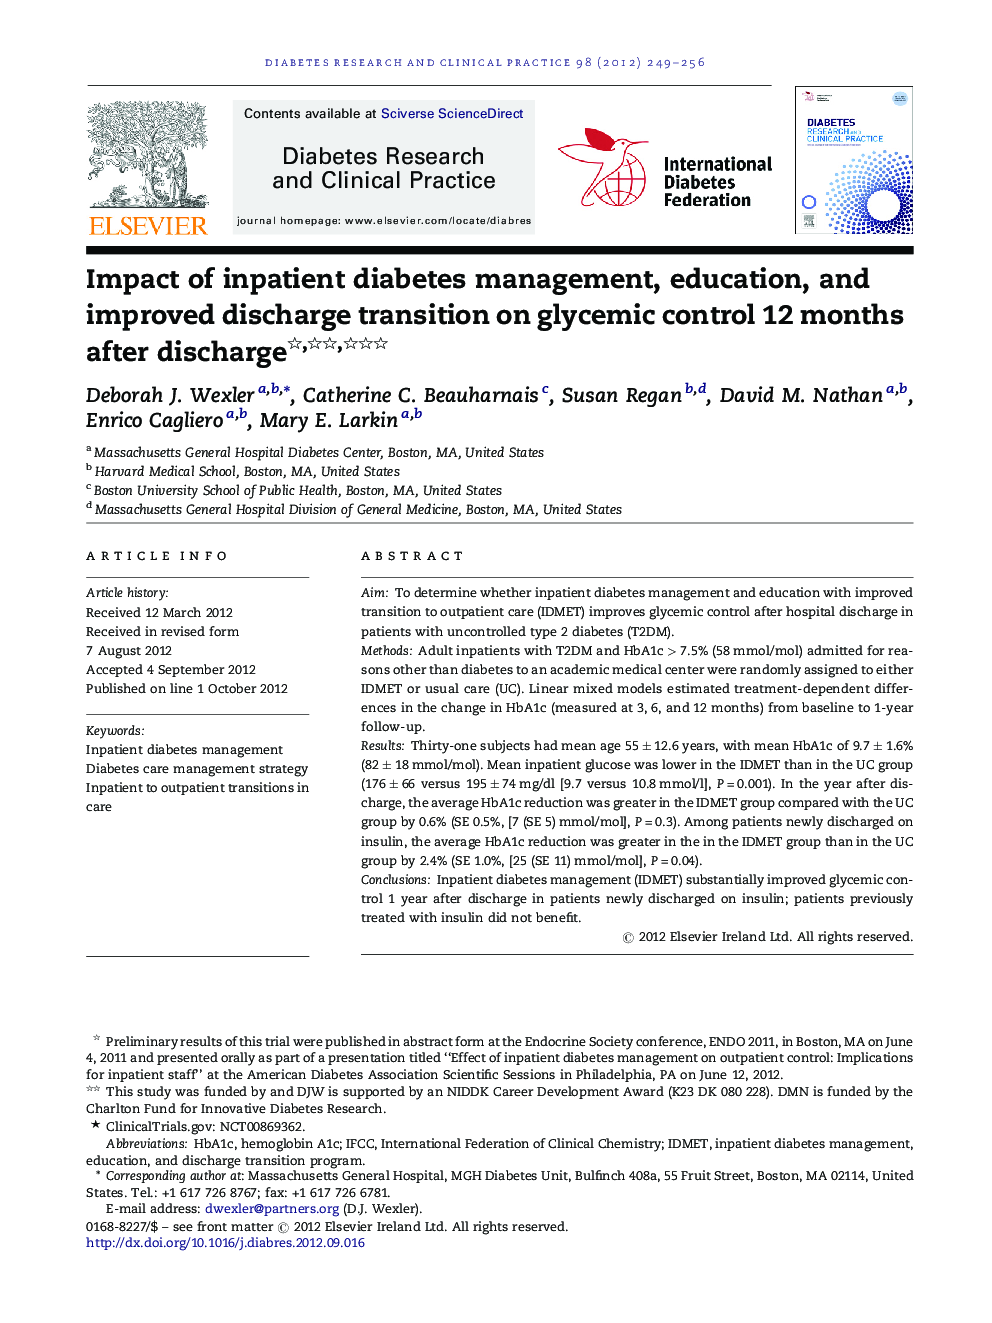 Impact of inpatient diabetes management, education, and improved discharge transition on glycemic control 12 months after discharge ★